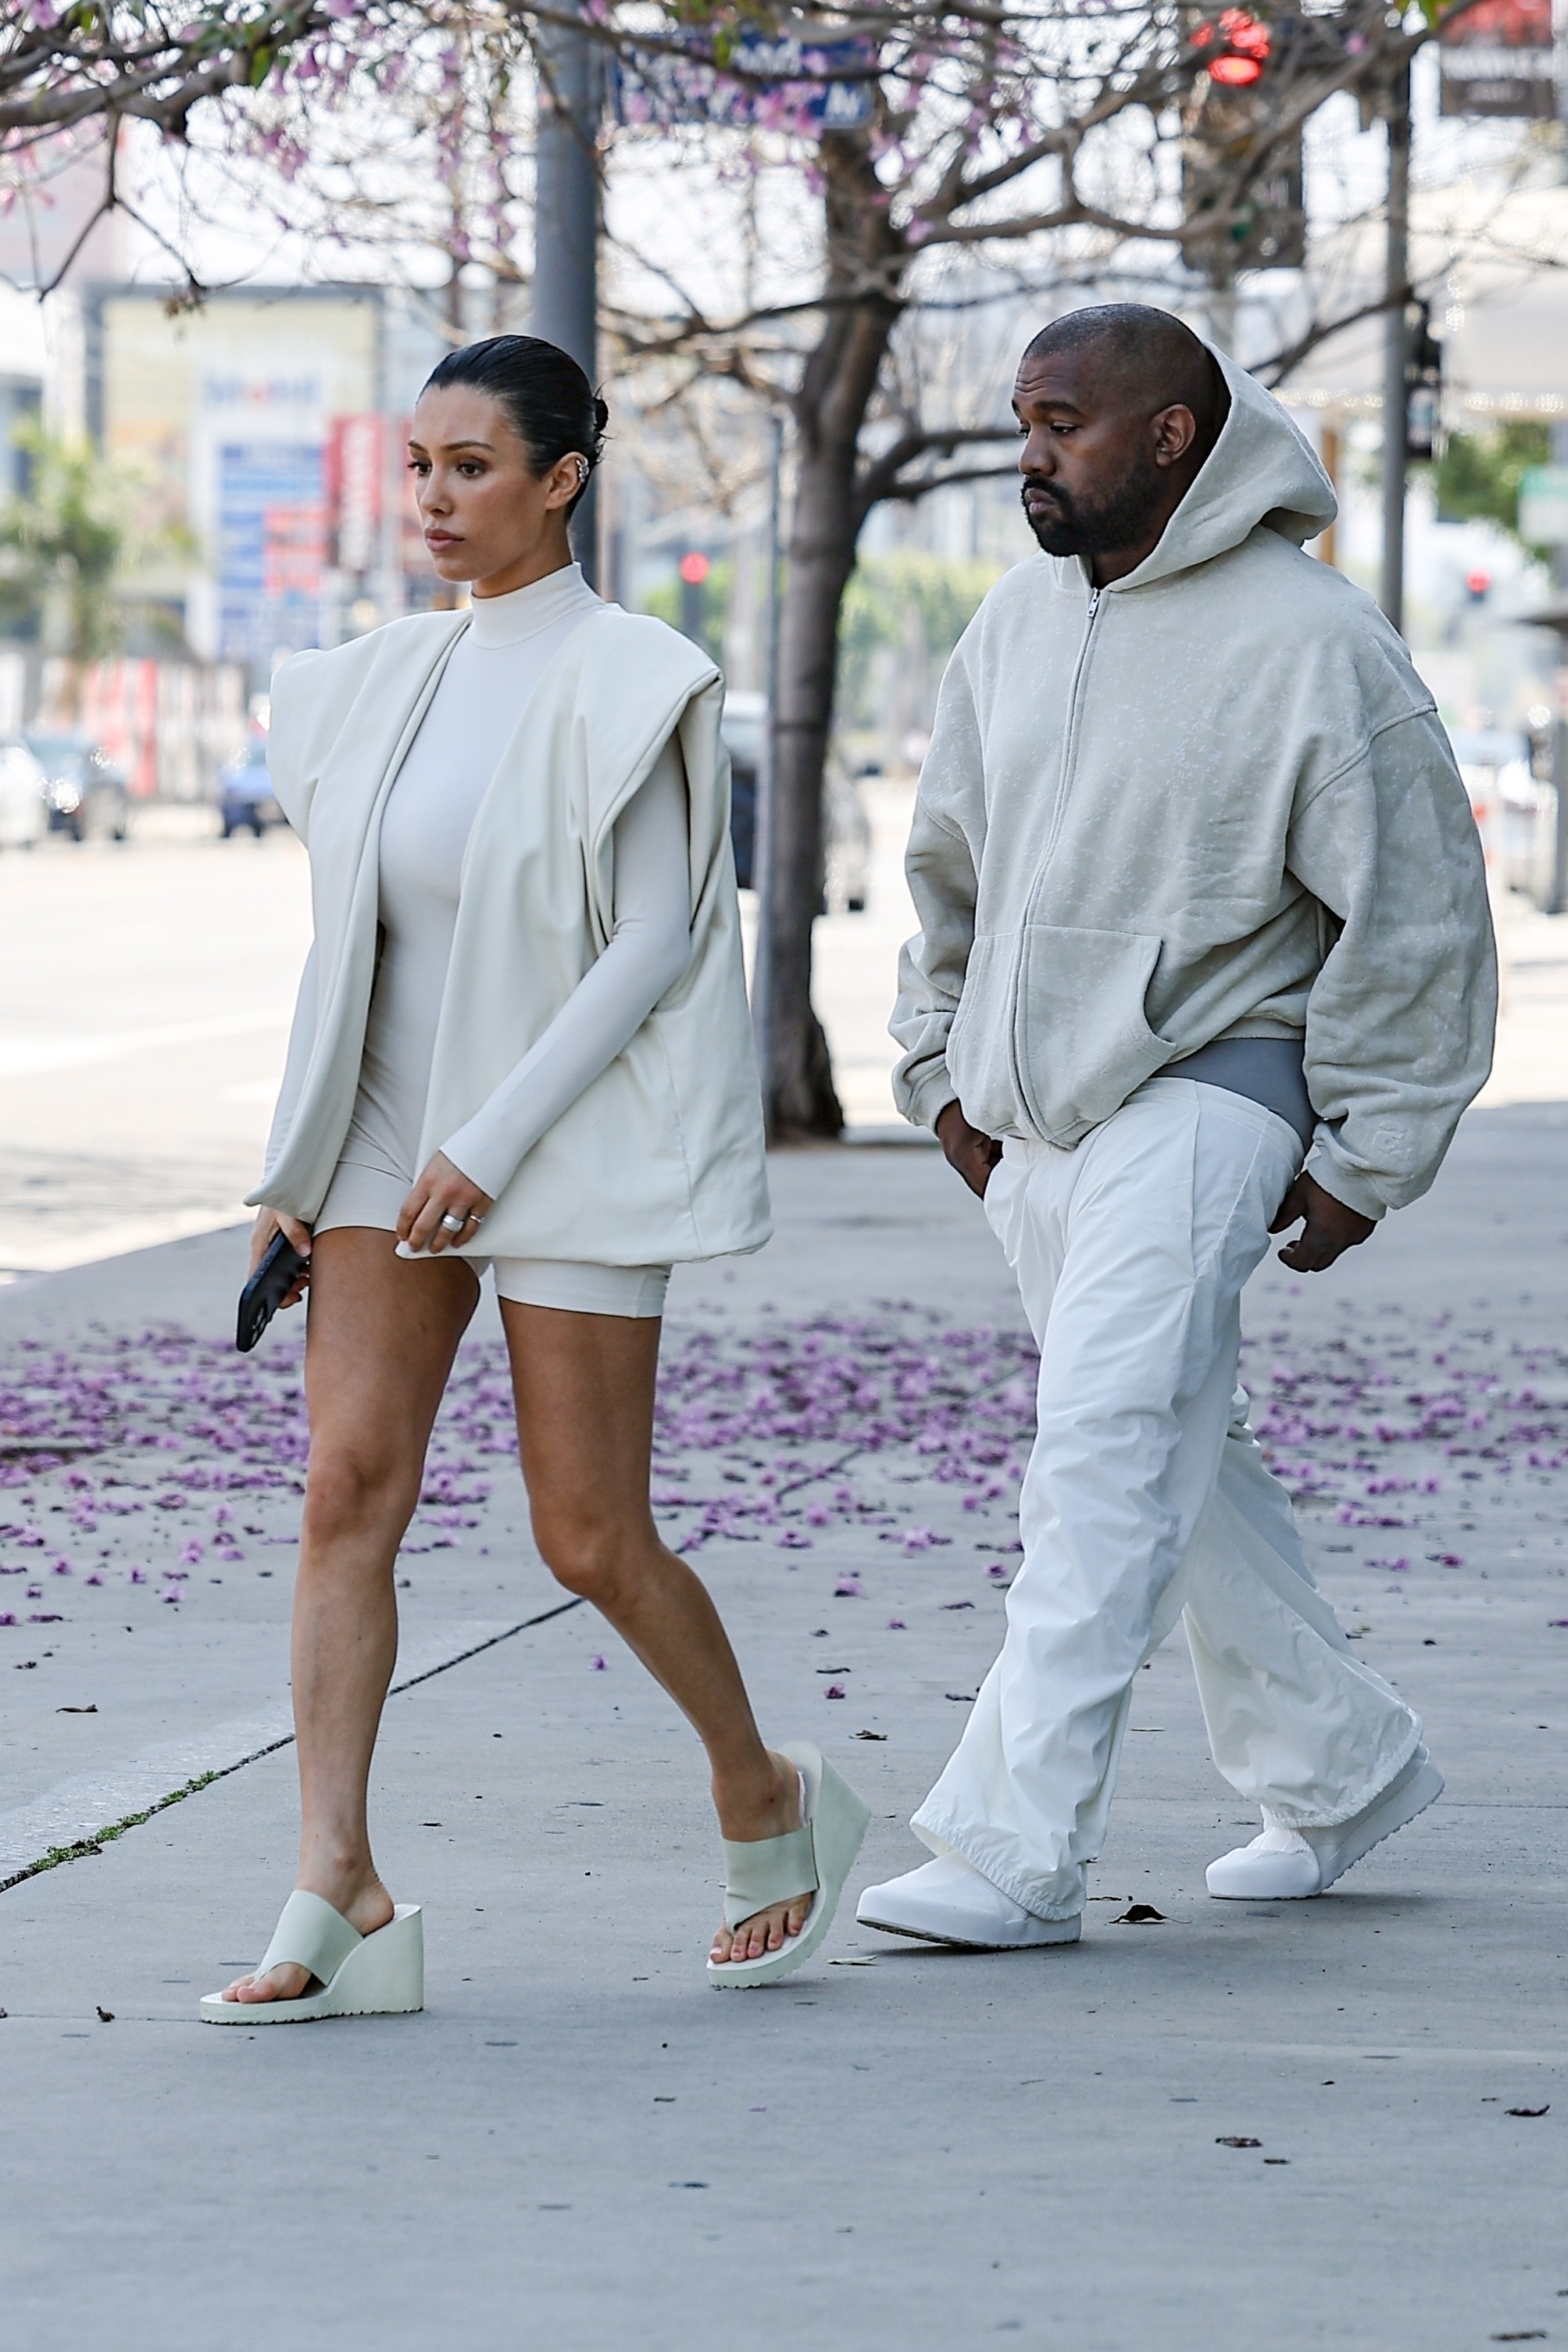 Kanye West stepped out with his wife, who looked distraught, in new photos